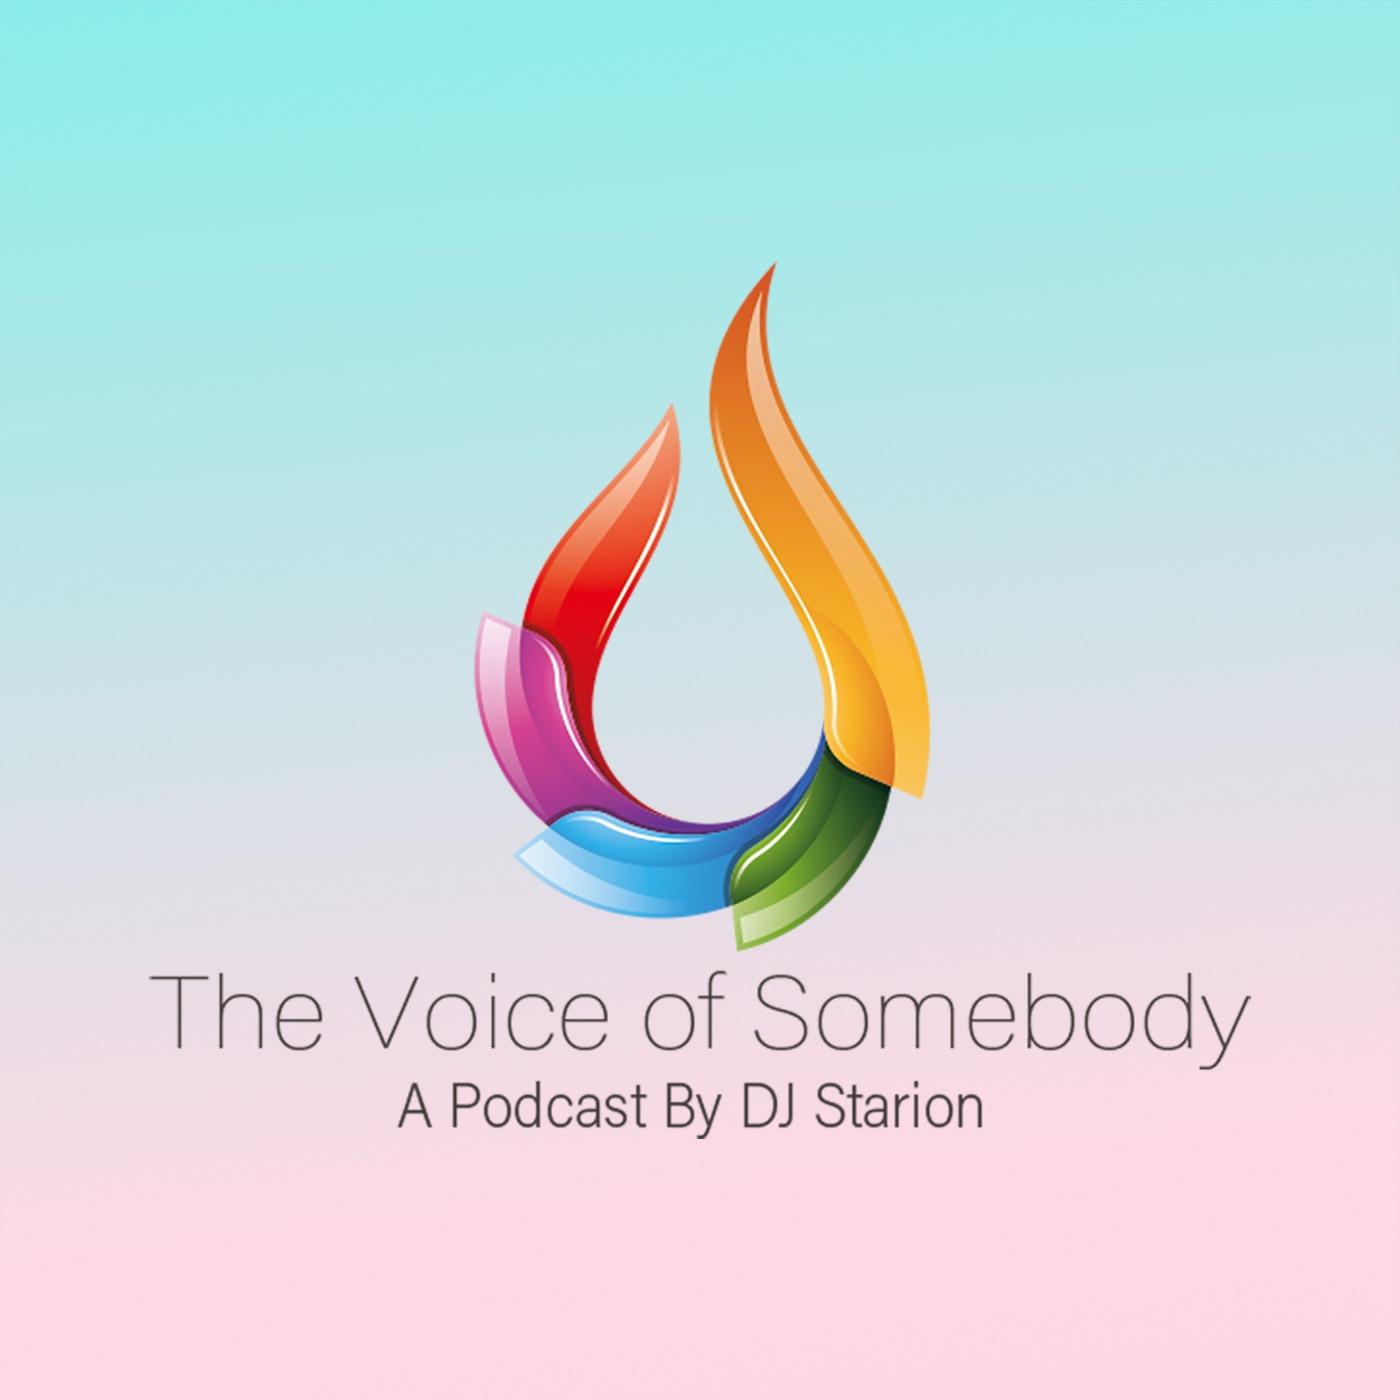 The Voice of Somebody